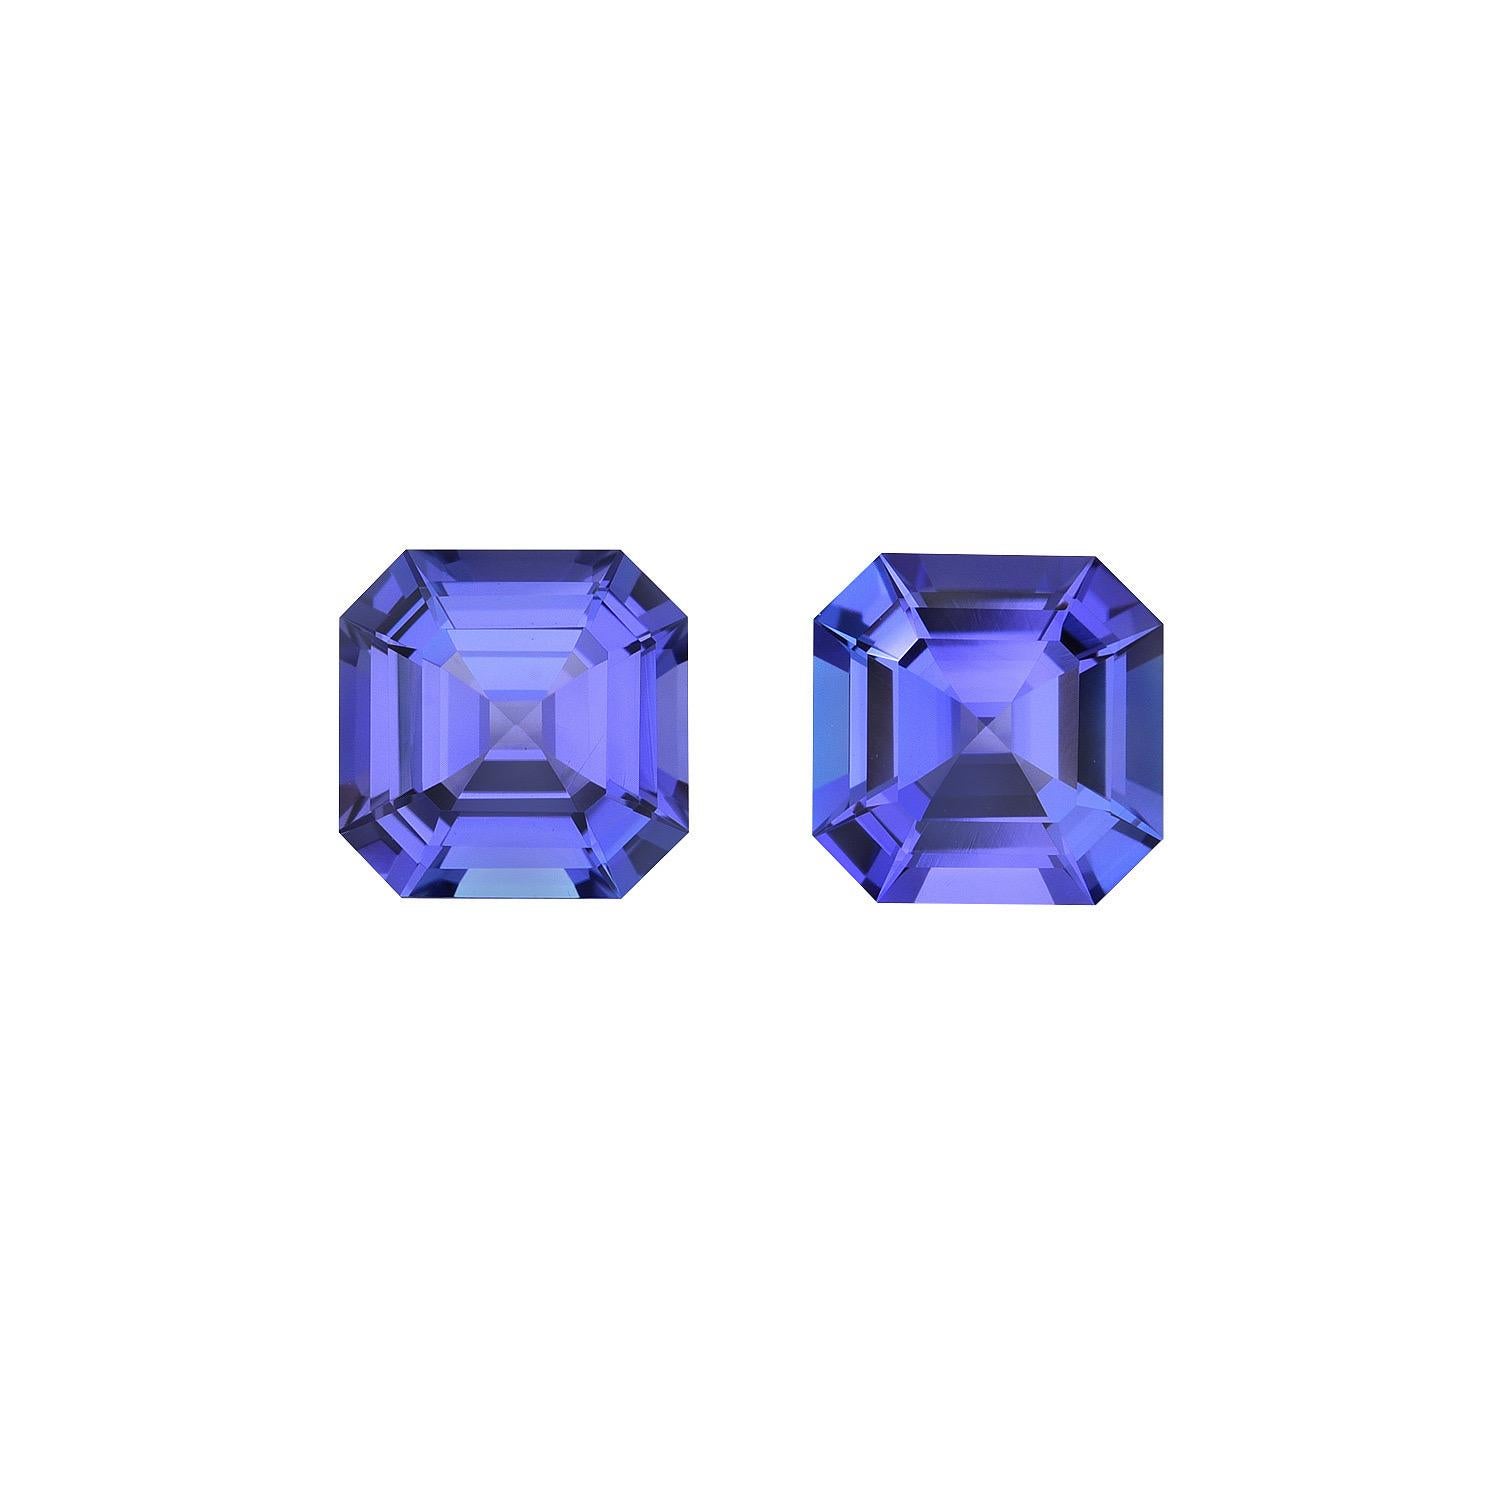 Special 3.34 carat Tanzanite pair of square octagon loose gemstones, offered unmounted to a very special lady.
Dimensions: 7.4 x 7.4 x 4.3 mm.
Returns are accepted and paid by us within 7 days of delivery.
We offer supreme custom jewelry work upon